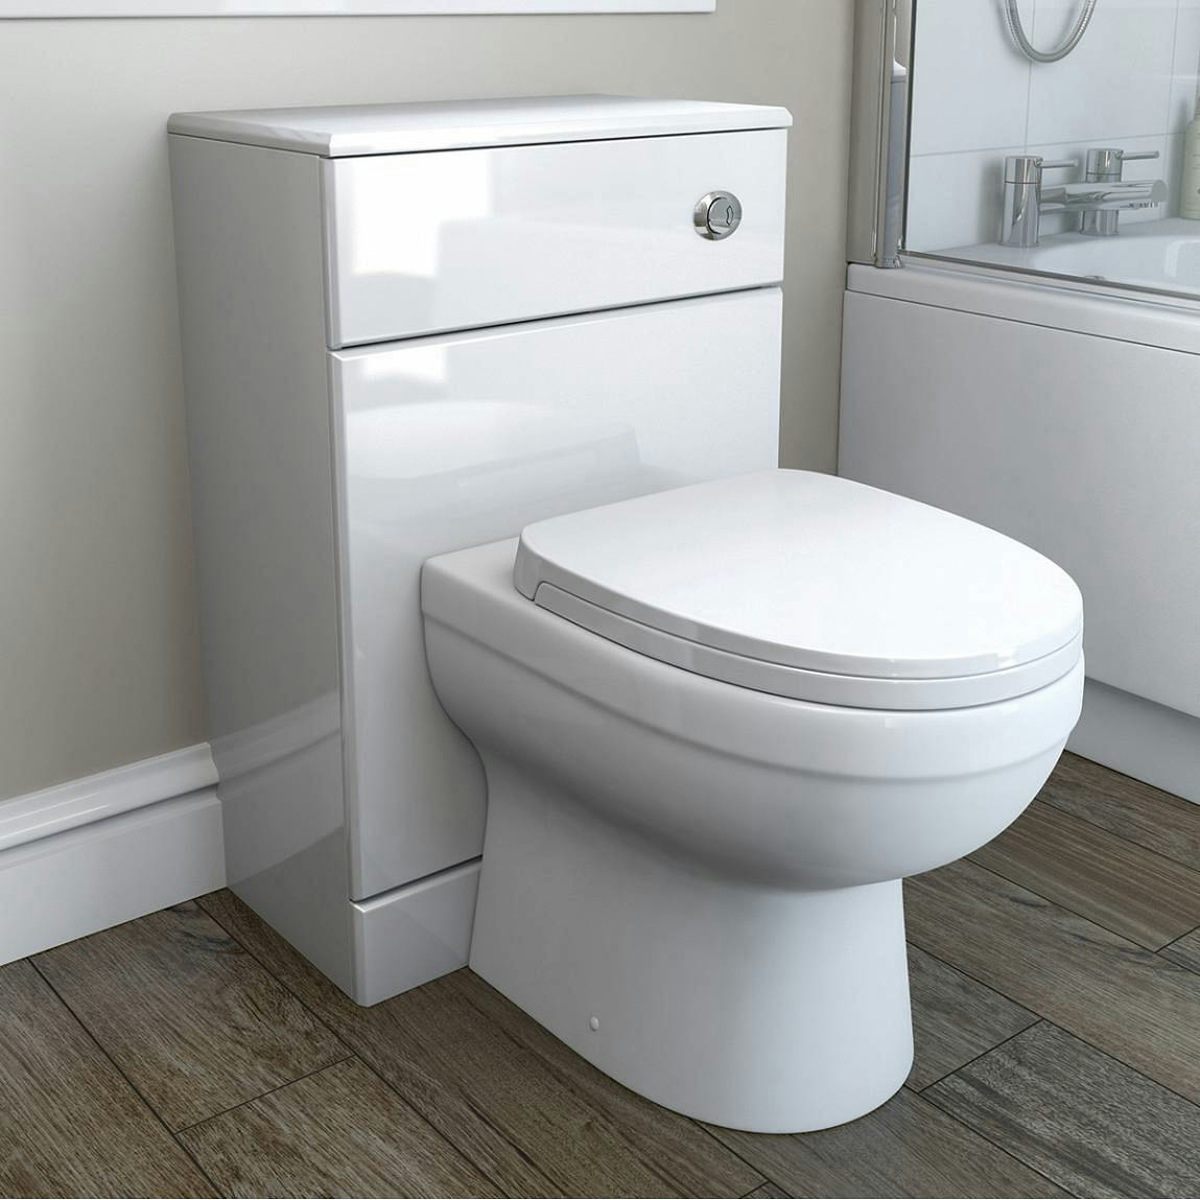 A back to wall toilet with unit